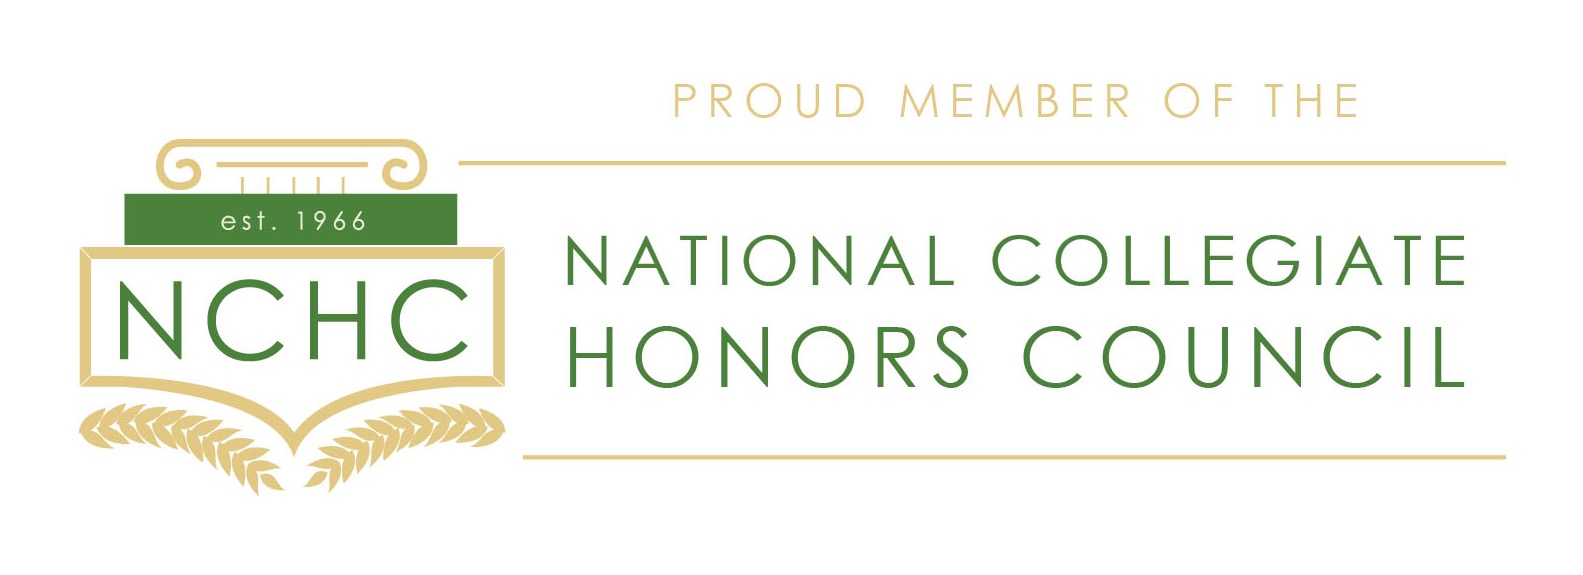 NATIONAL COLLEGIATE HONORS COUNCIL